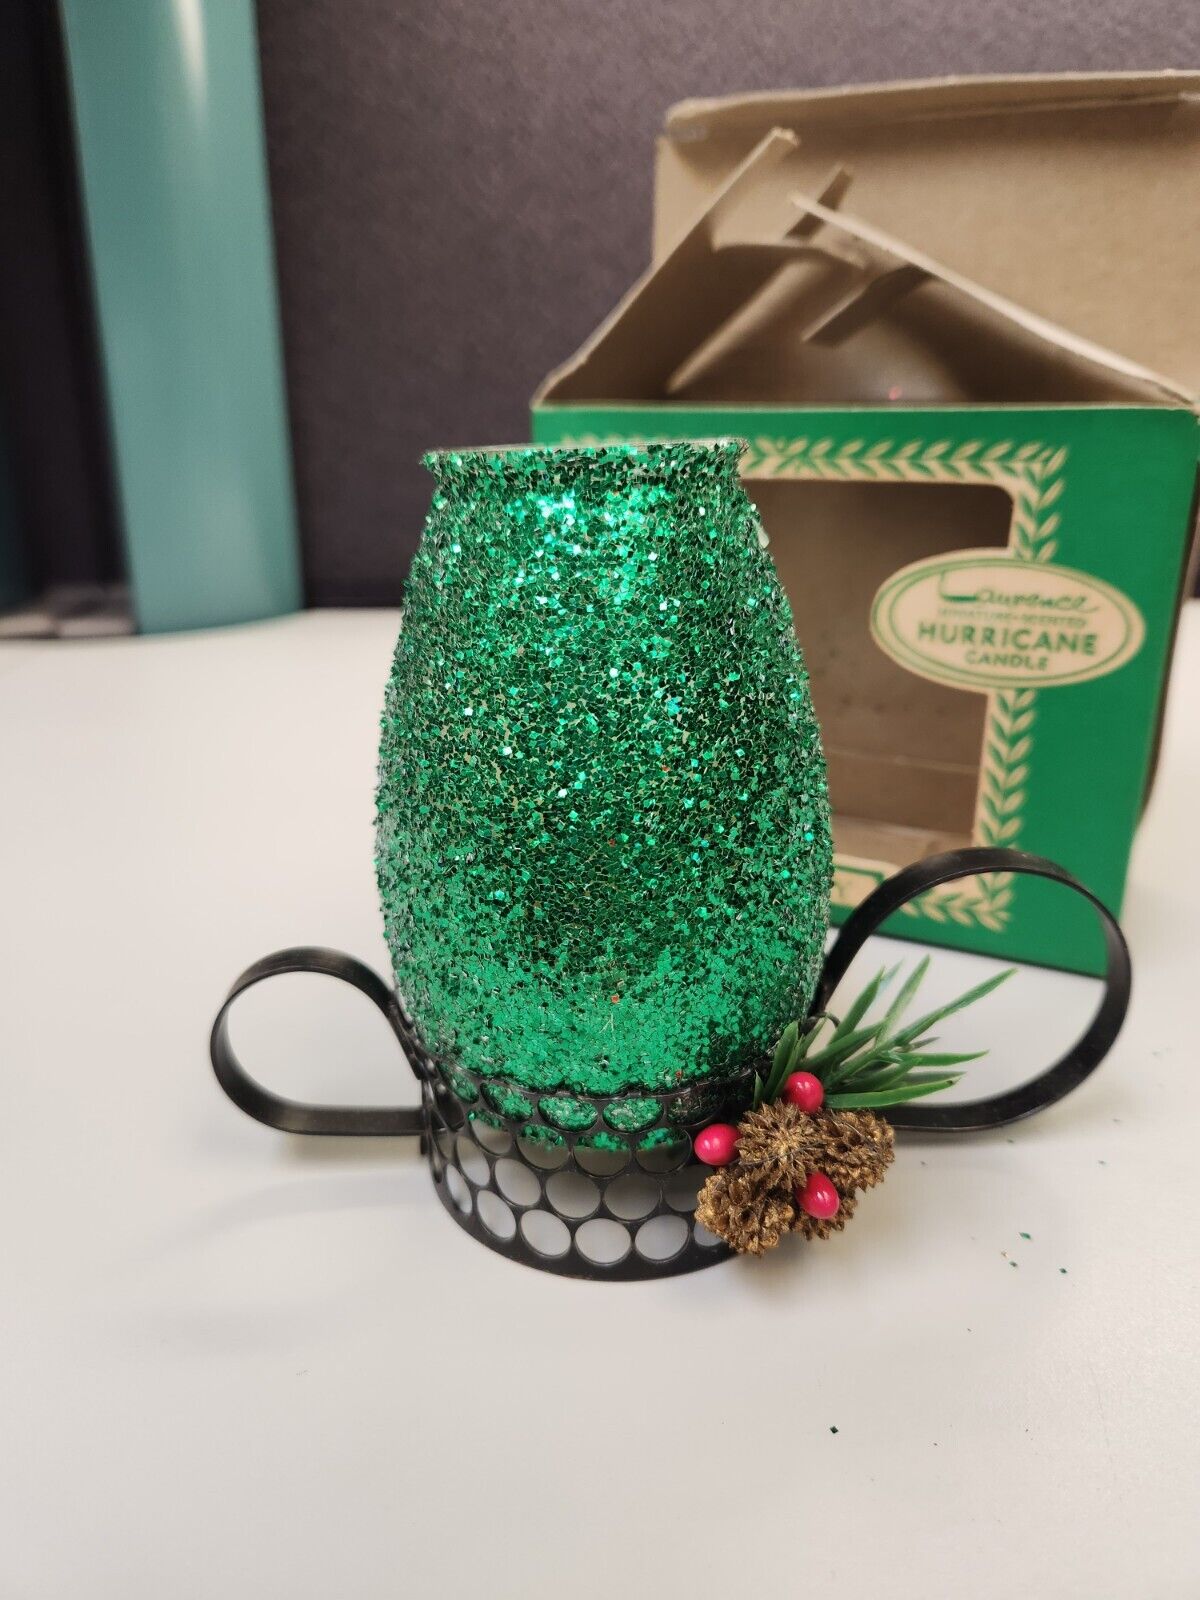 Vintage Laurence Miniature Green Bayberry Hurricane Candle Boxed Glitter W/Box